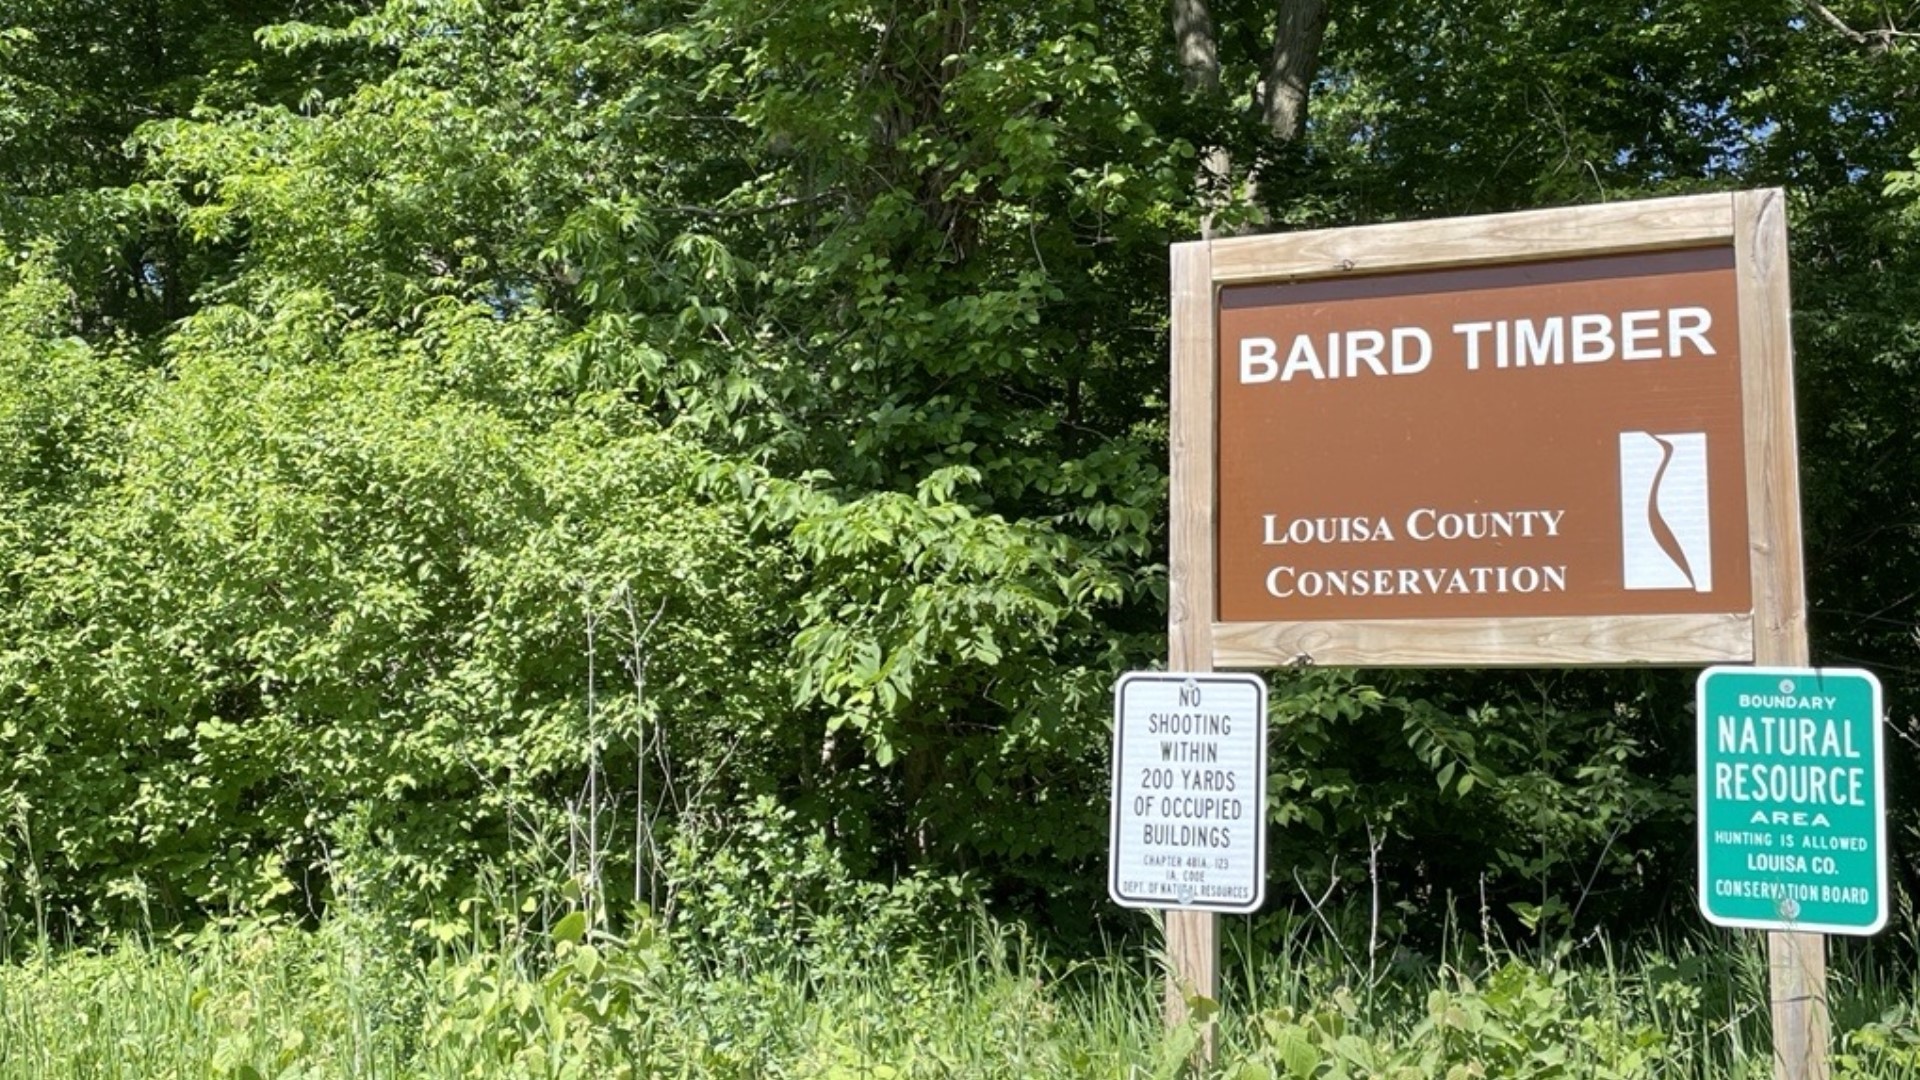 The family gave the 18.5-acre plot to the Louisa County Conservation Board decades ago. Now the board is considering selling the land to pay for campground upgrades.